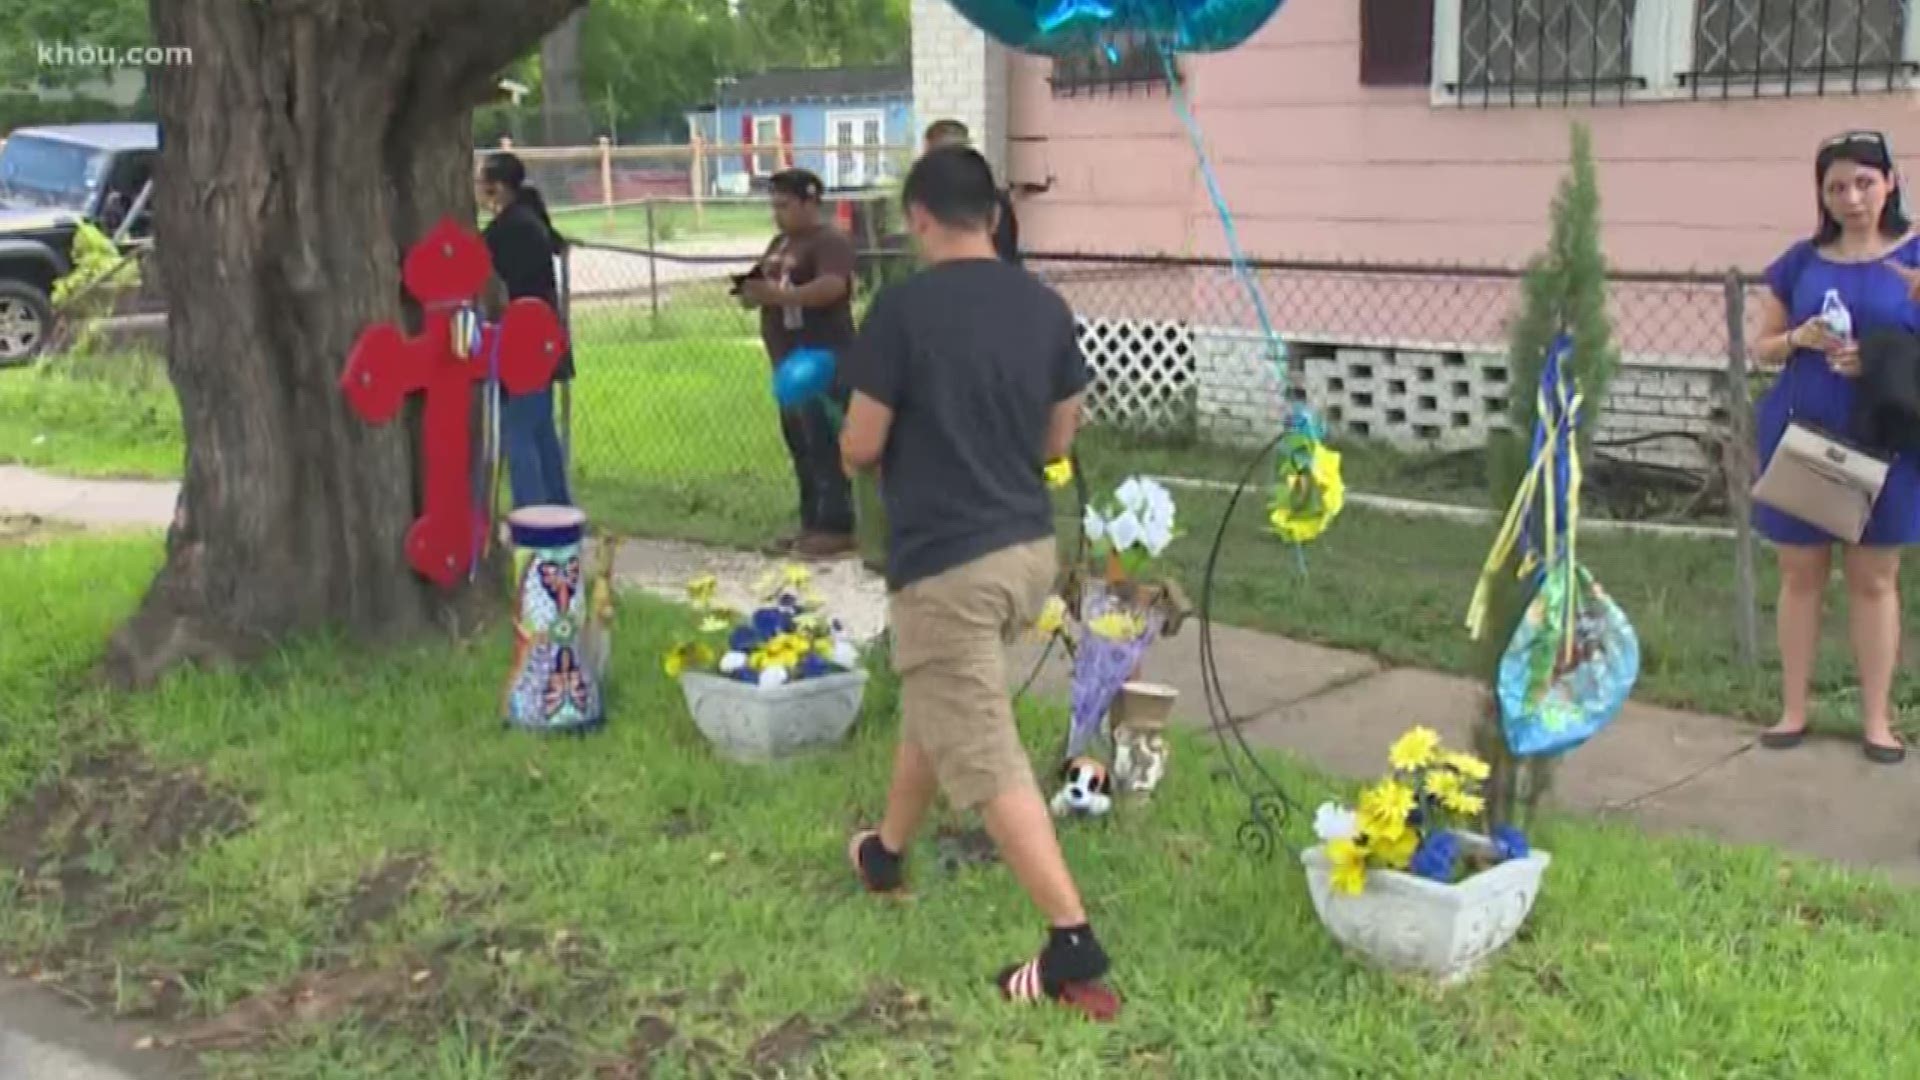 Several Houstonians showed up to Josue Flores' memorial to pay respects to the boy after an arrest was made in his murder.